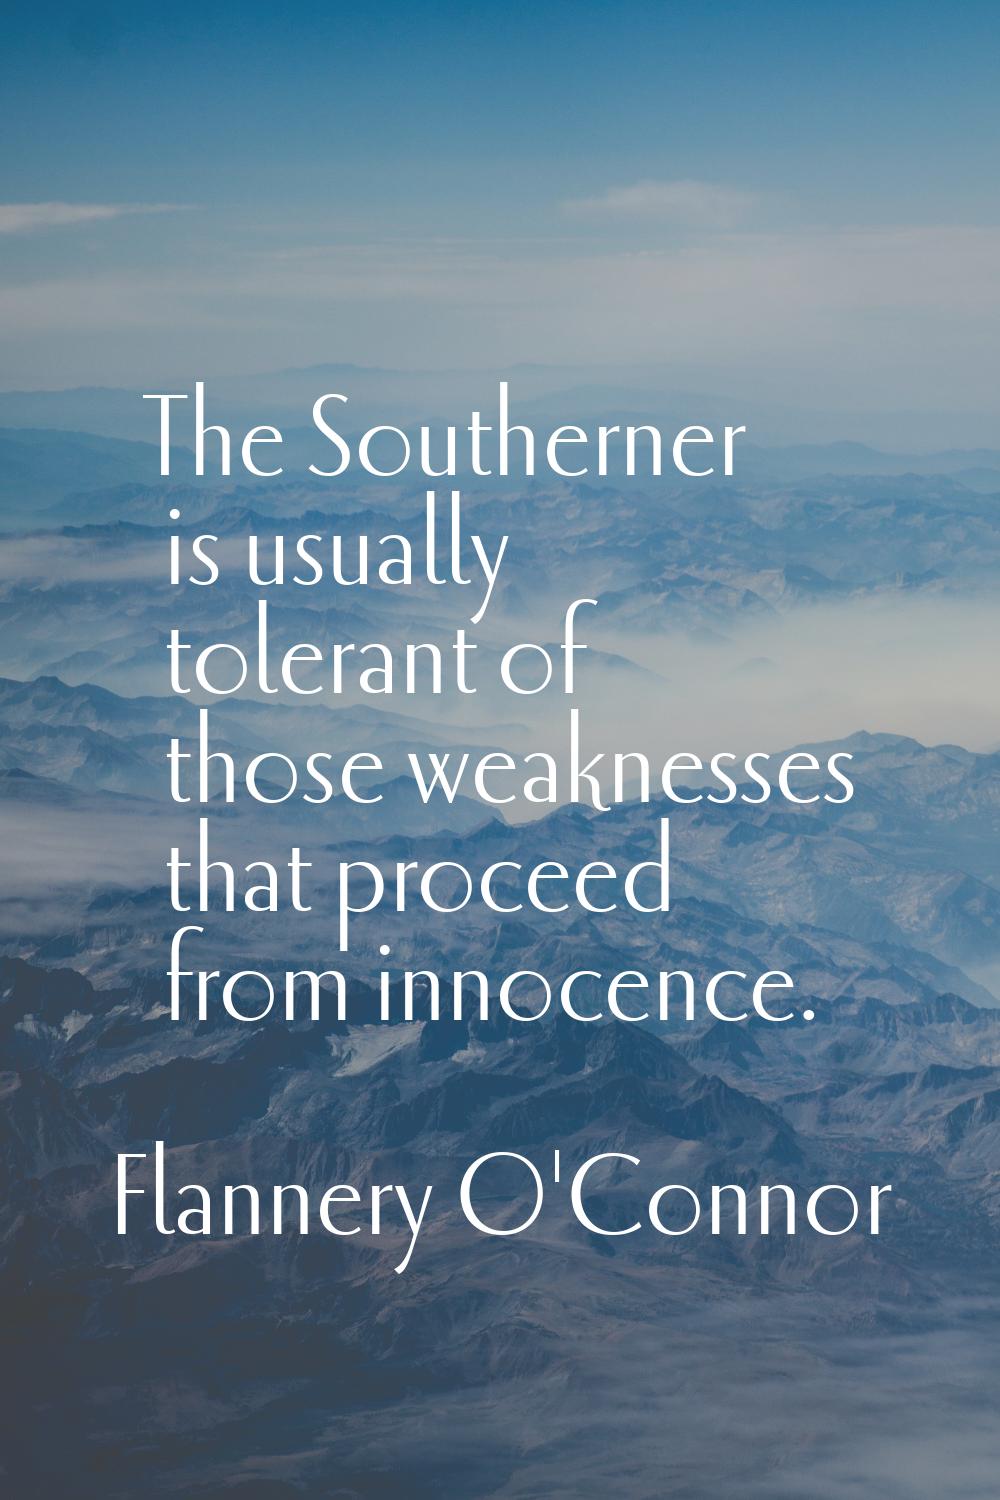 The Southerner is usually tolerant of those weaknesses that proceed from innocence.